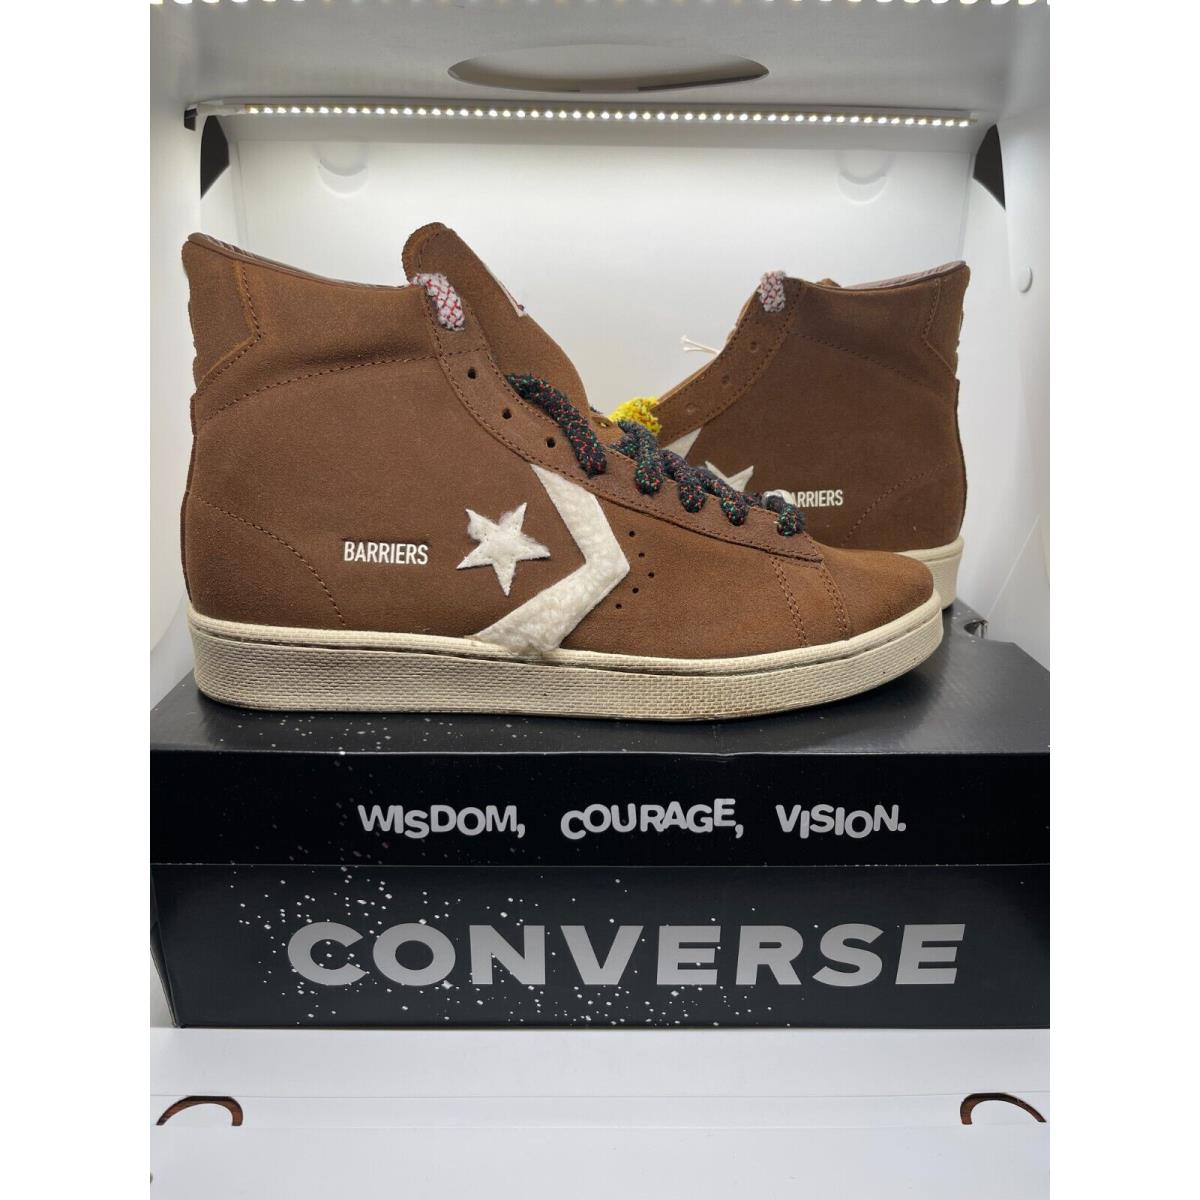 Converse x Barriers Pro Leather Brown Size 10.5M/12W Men Shoes Sneakers A01787C